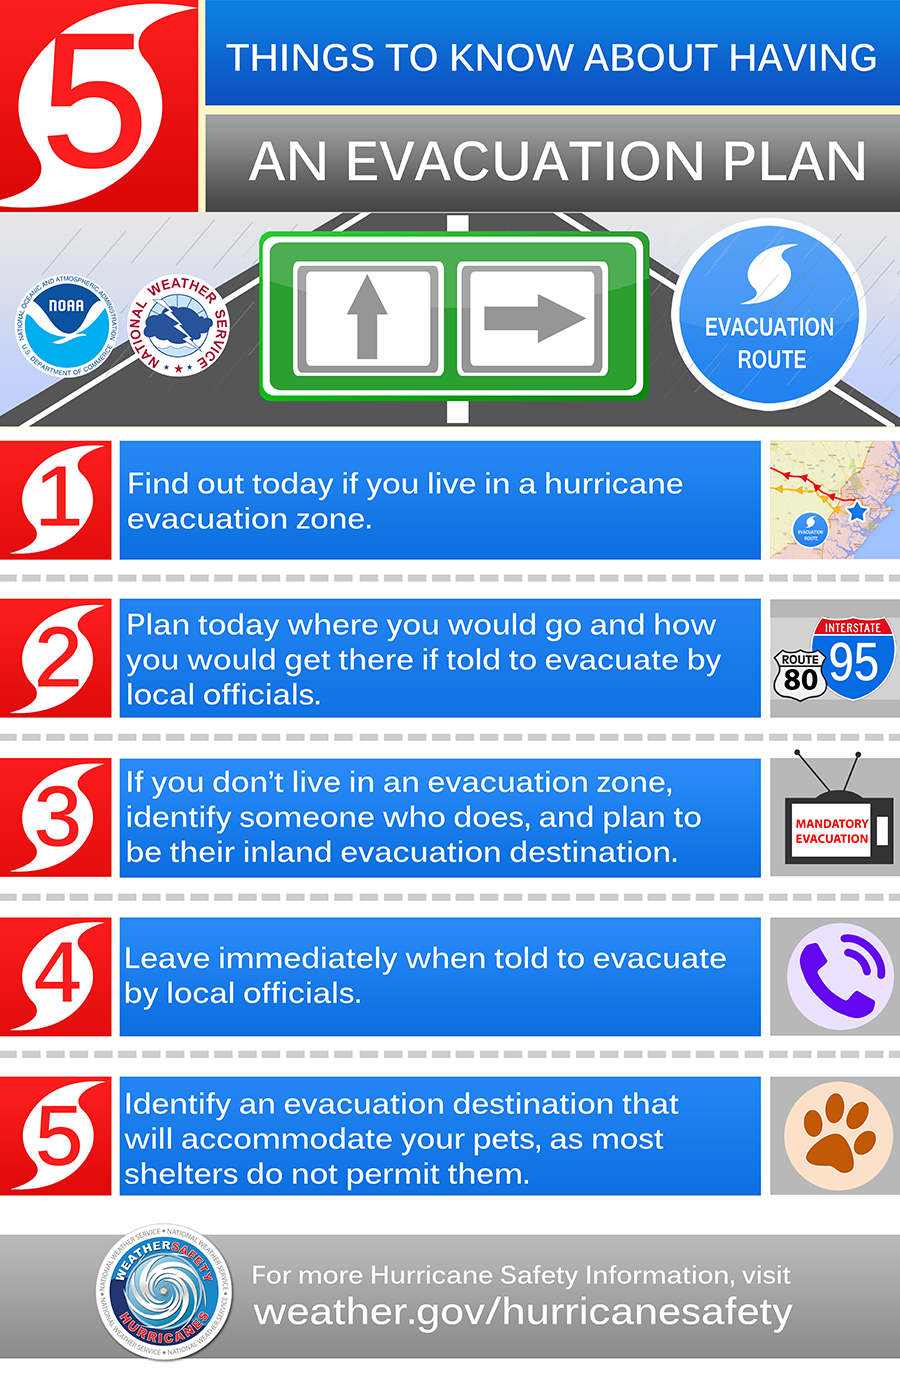 Things to know about having an evacuation plan